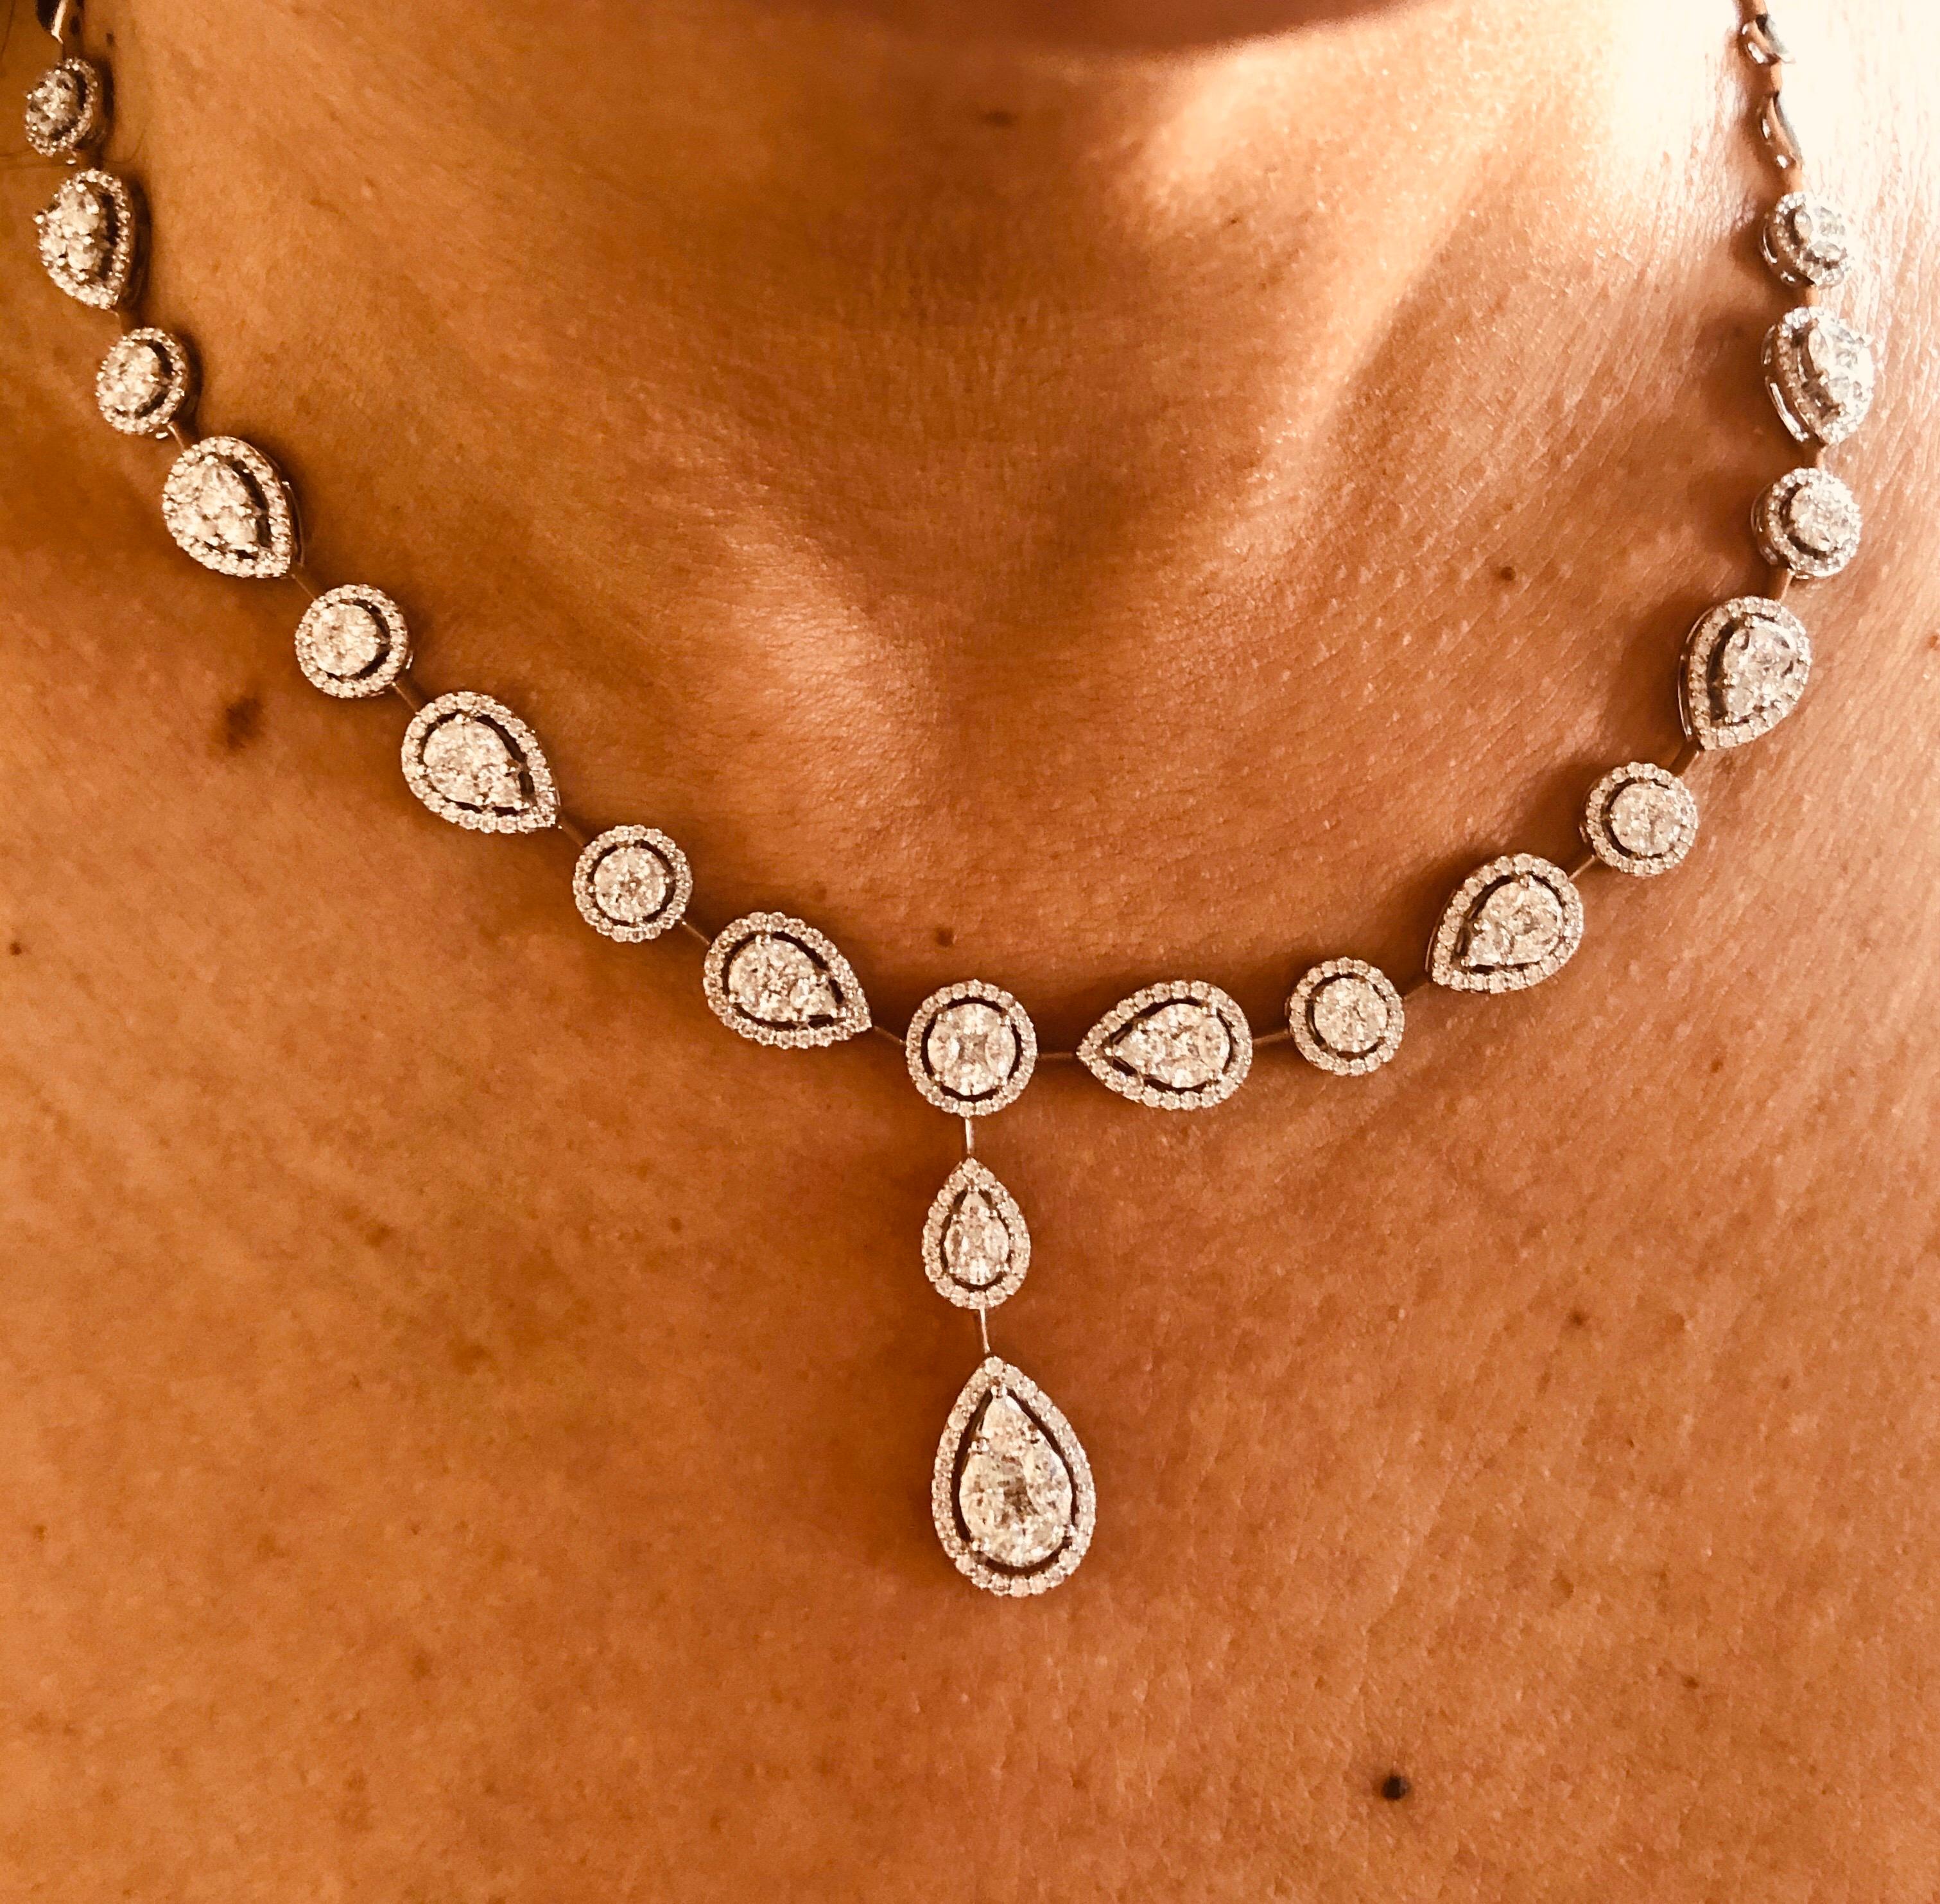 18K White necklace set with multi cut stones to create the illusion of a single round and pear shaped diamonds. The necklace is set half way of diamonds. The total weight of the piece is 9.17 carats. The color of the stones are F, the clarity is